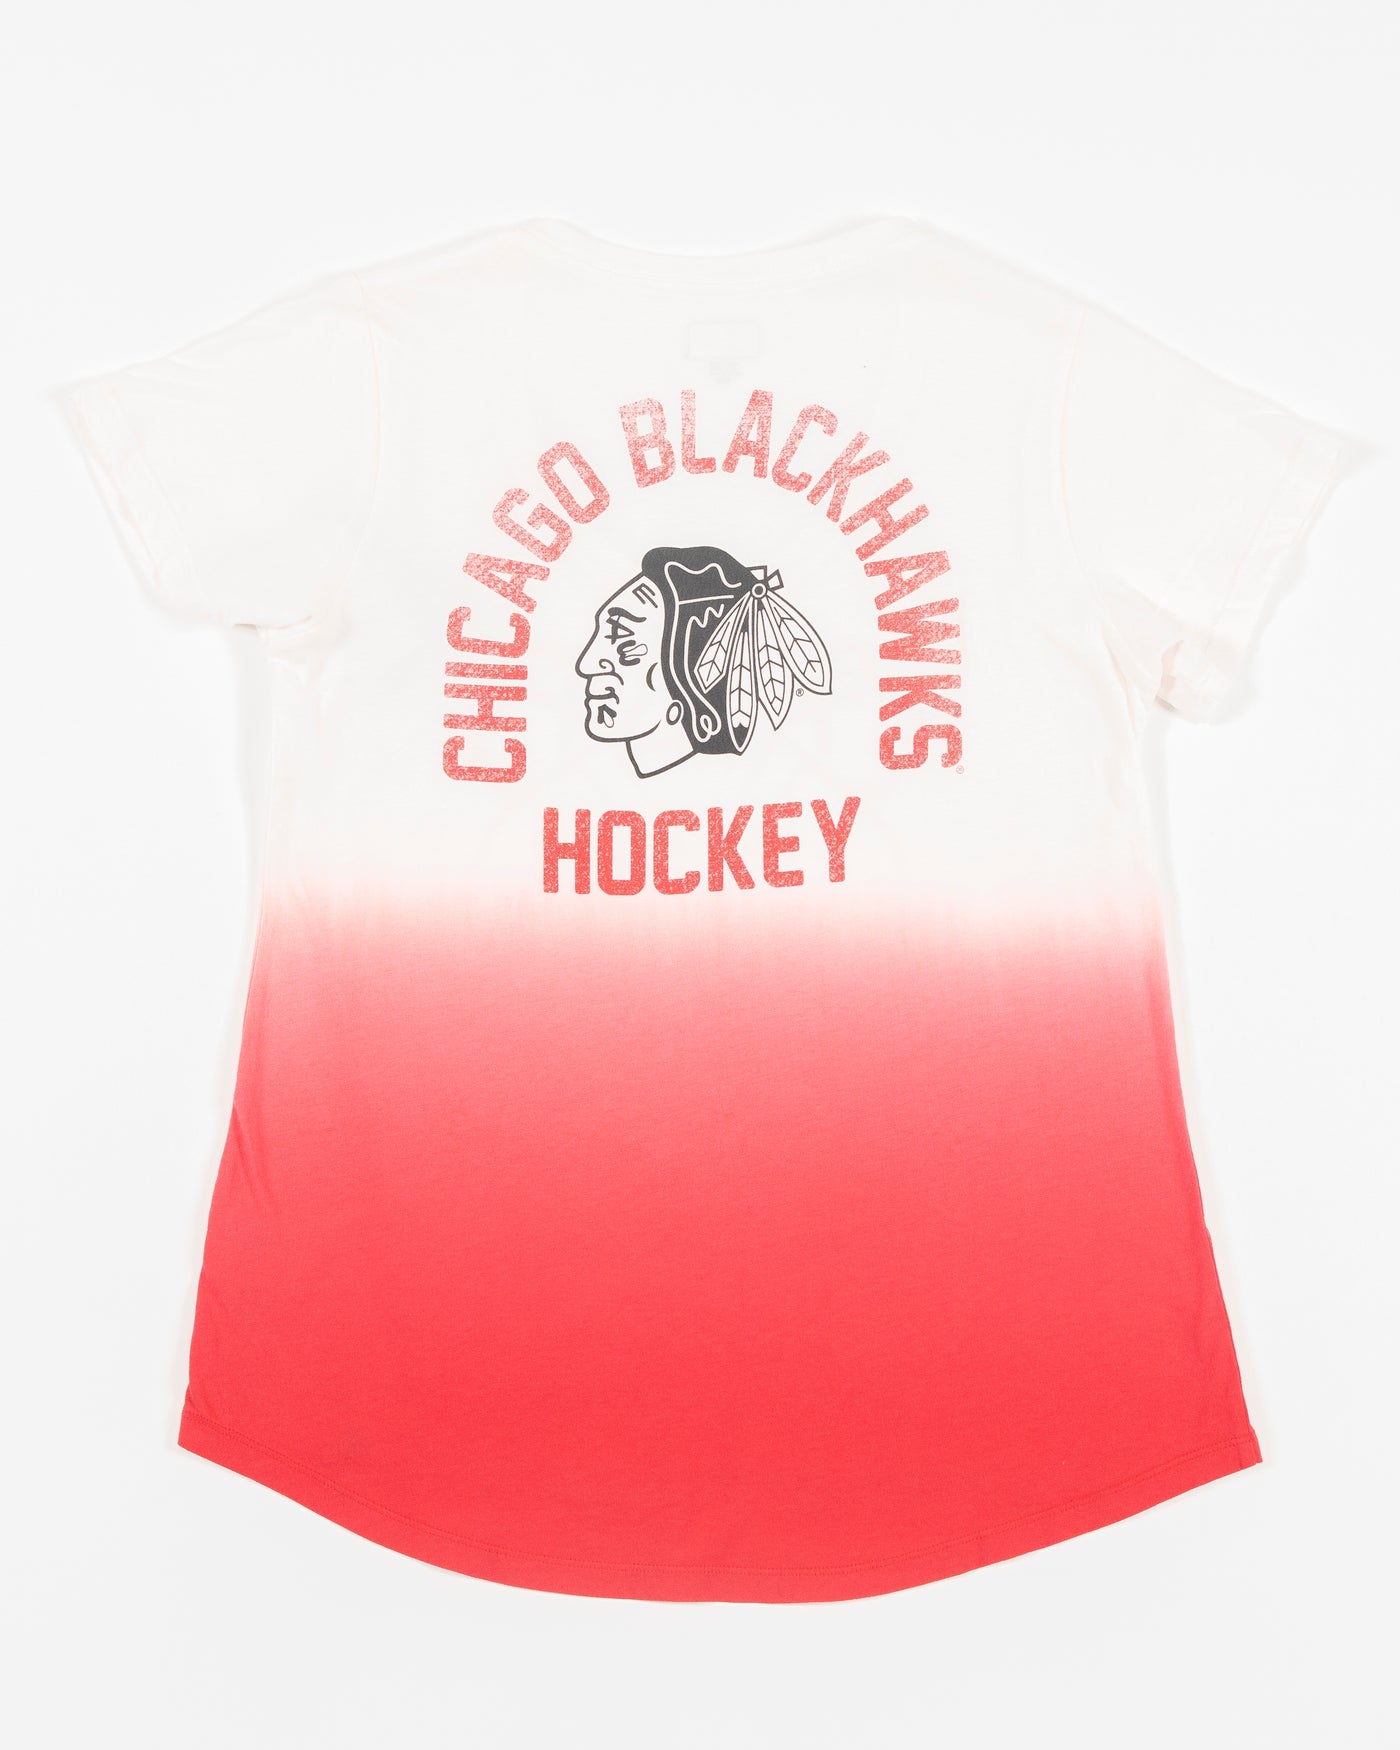 New Era red and white ombre women's tee with Chicago Blackhawks secondary logo on front - back lay flat